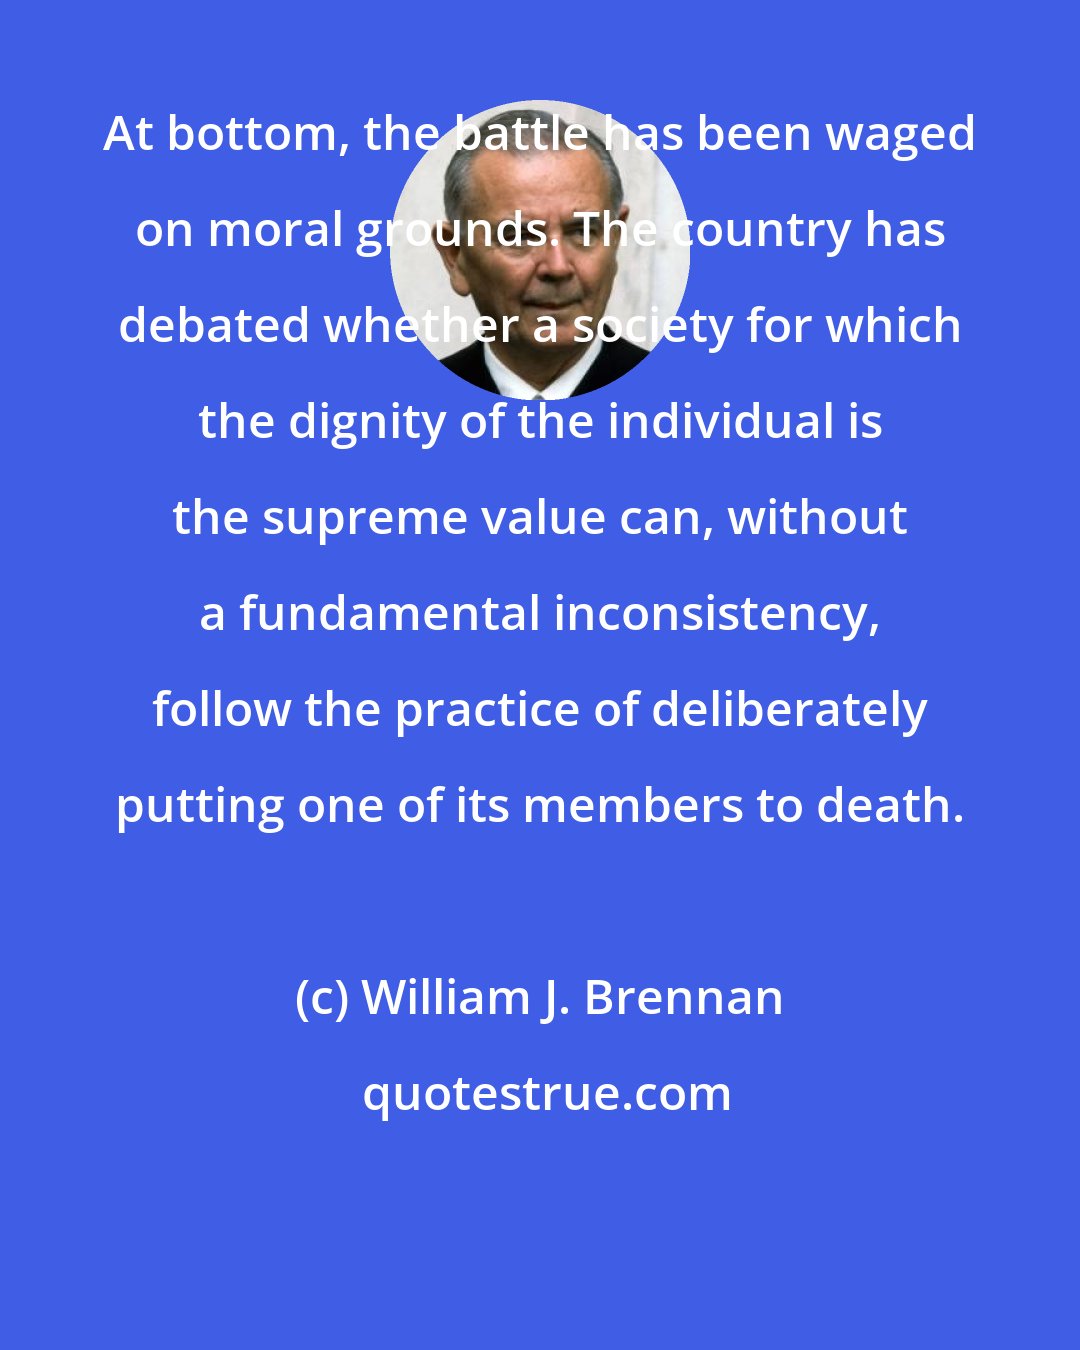 William J. Brennan: At bottom, the battle has been waged on moral grounds. The country has debated whether a society for which the dignity of the individual is the supreme value can, without a fundamental inconsistency, follow the practice of deliberately putting one of its members to death.